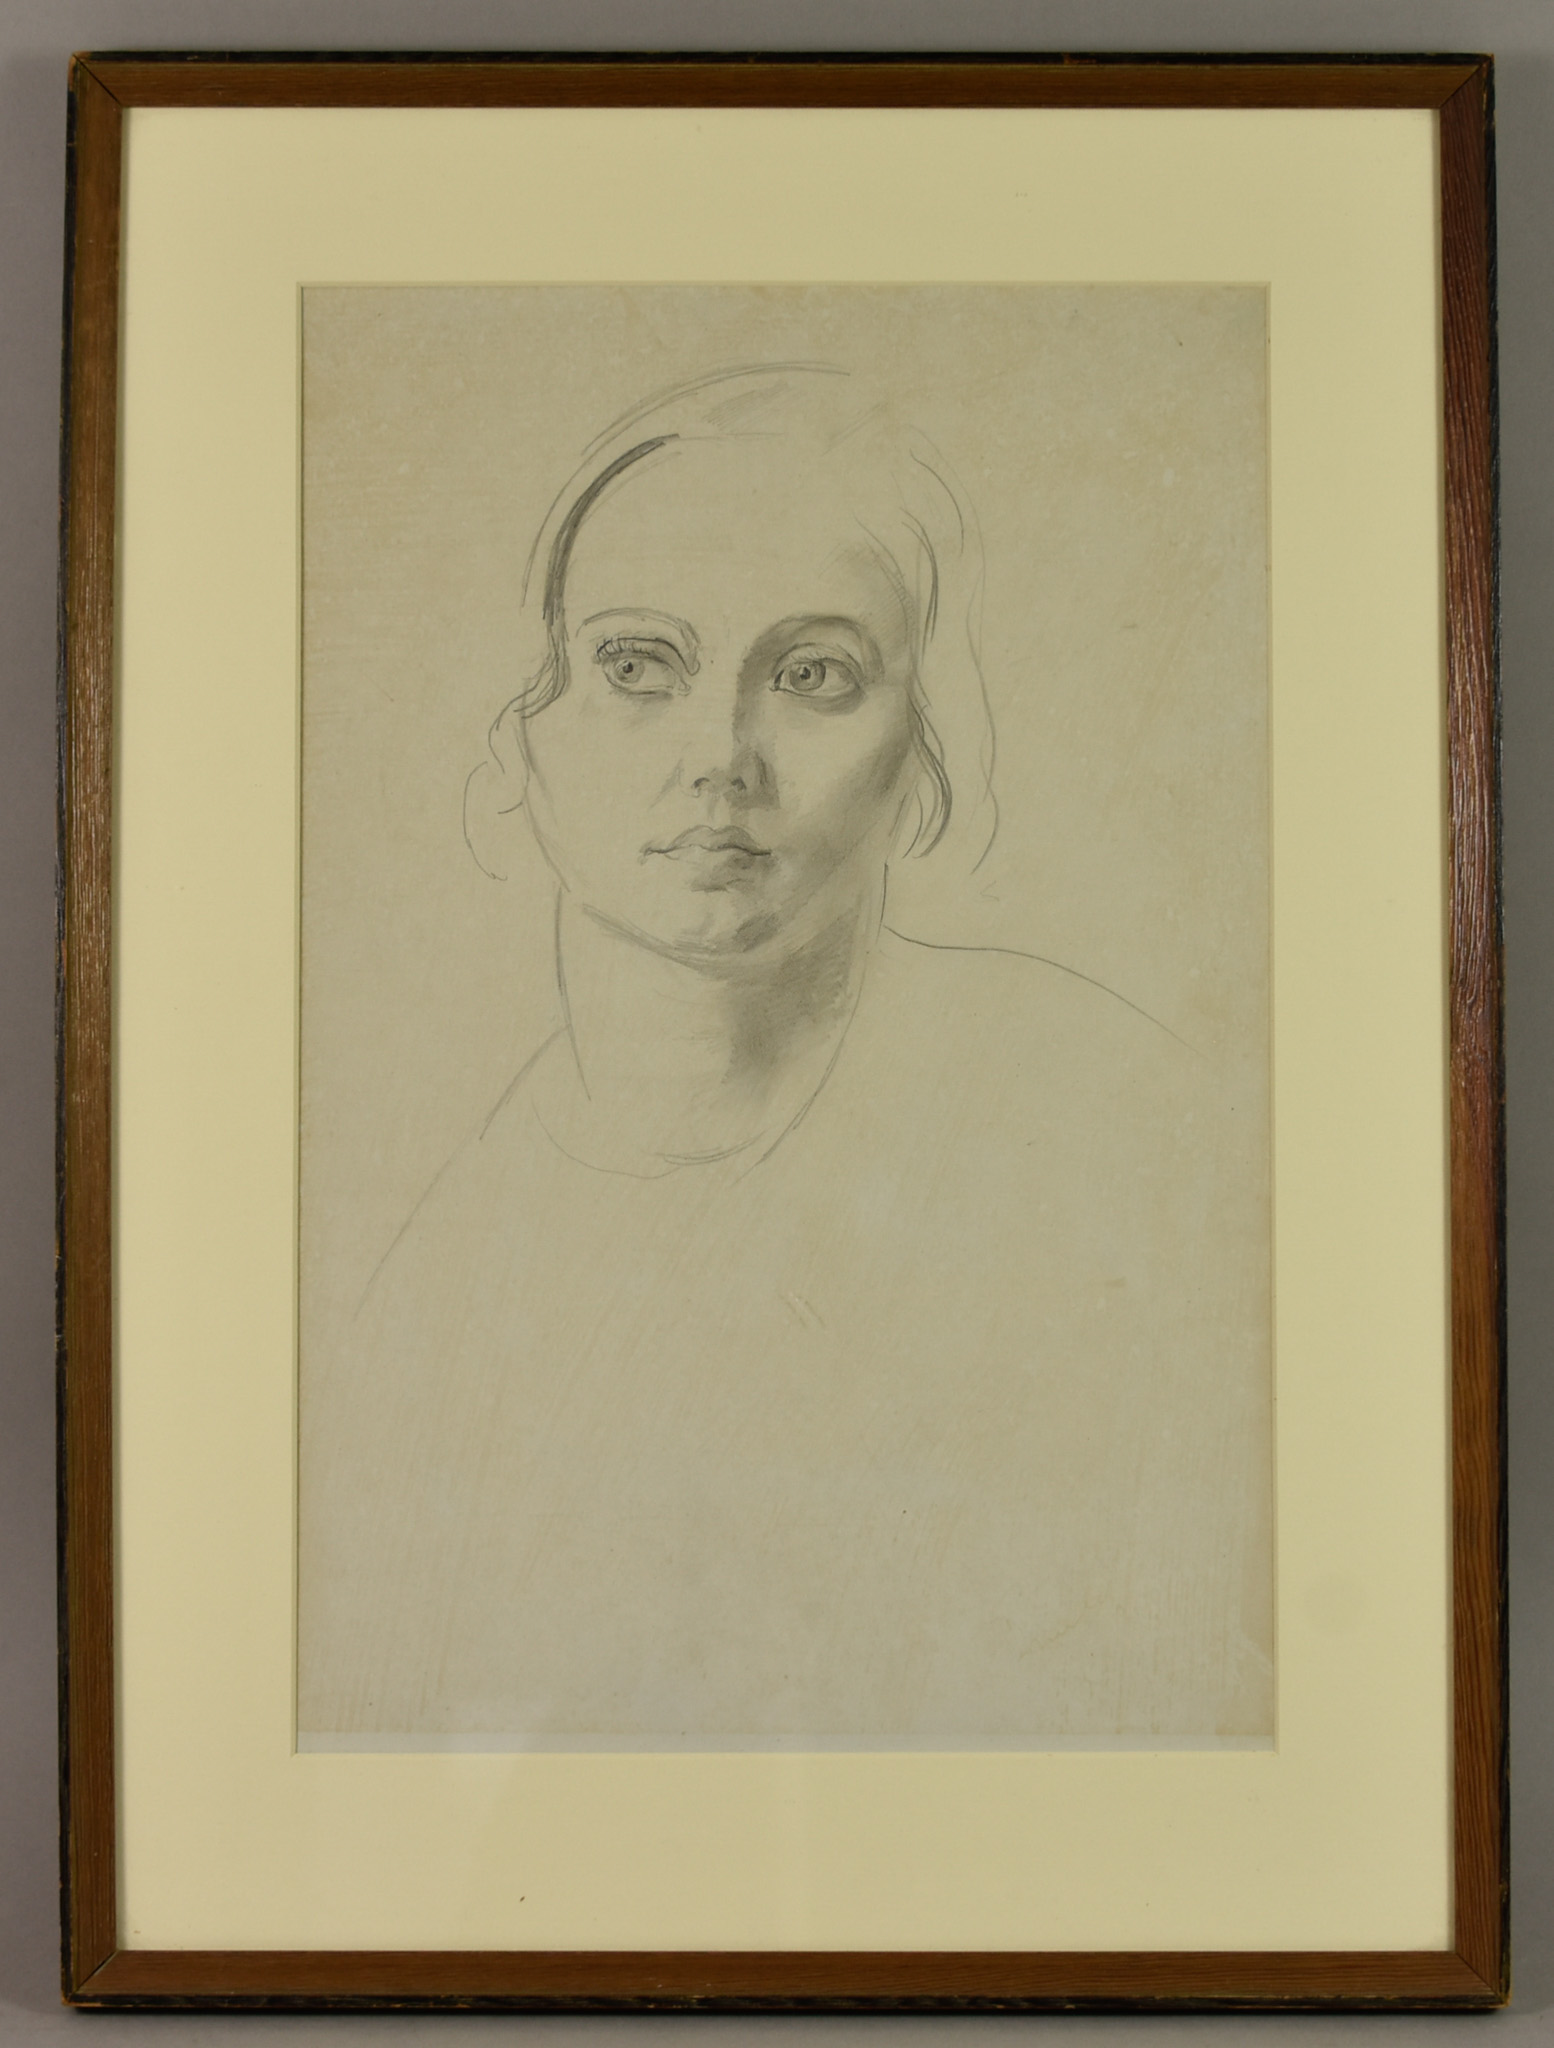 Roland Ossary Dunlop (1984-1973) - Pencil drawing - "Portrait of a Girl" - shoulder length portrait, - Image 2 of 3